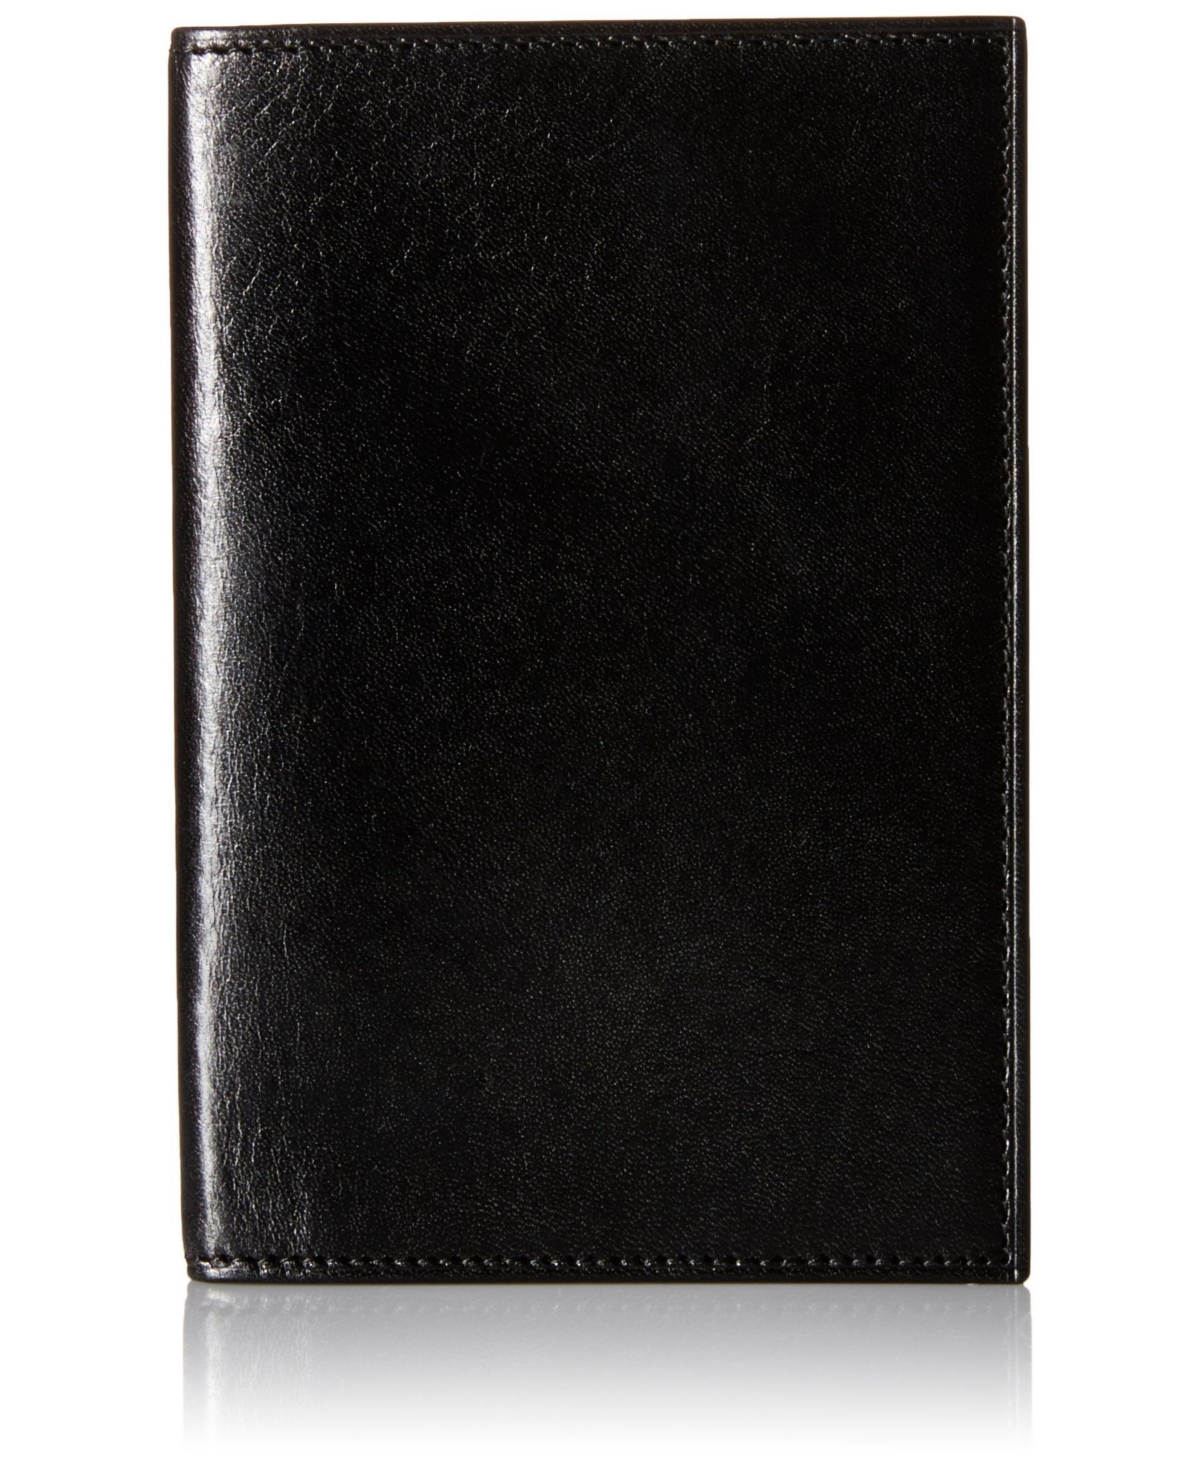 Men's Old Leather Collection - Passport Case - Black